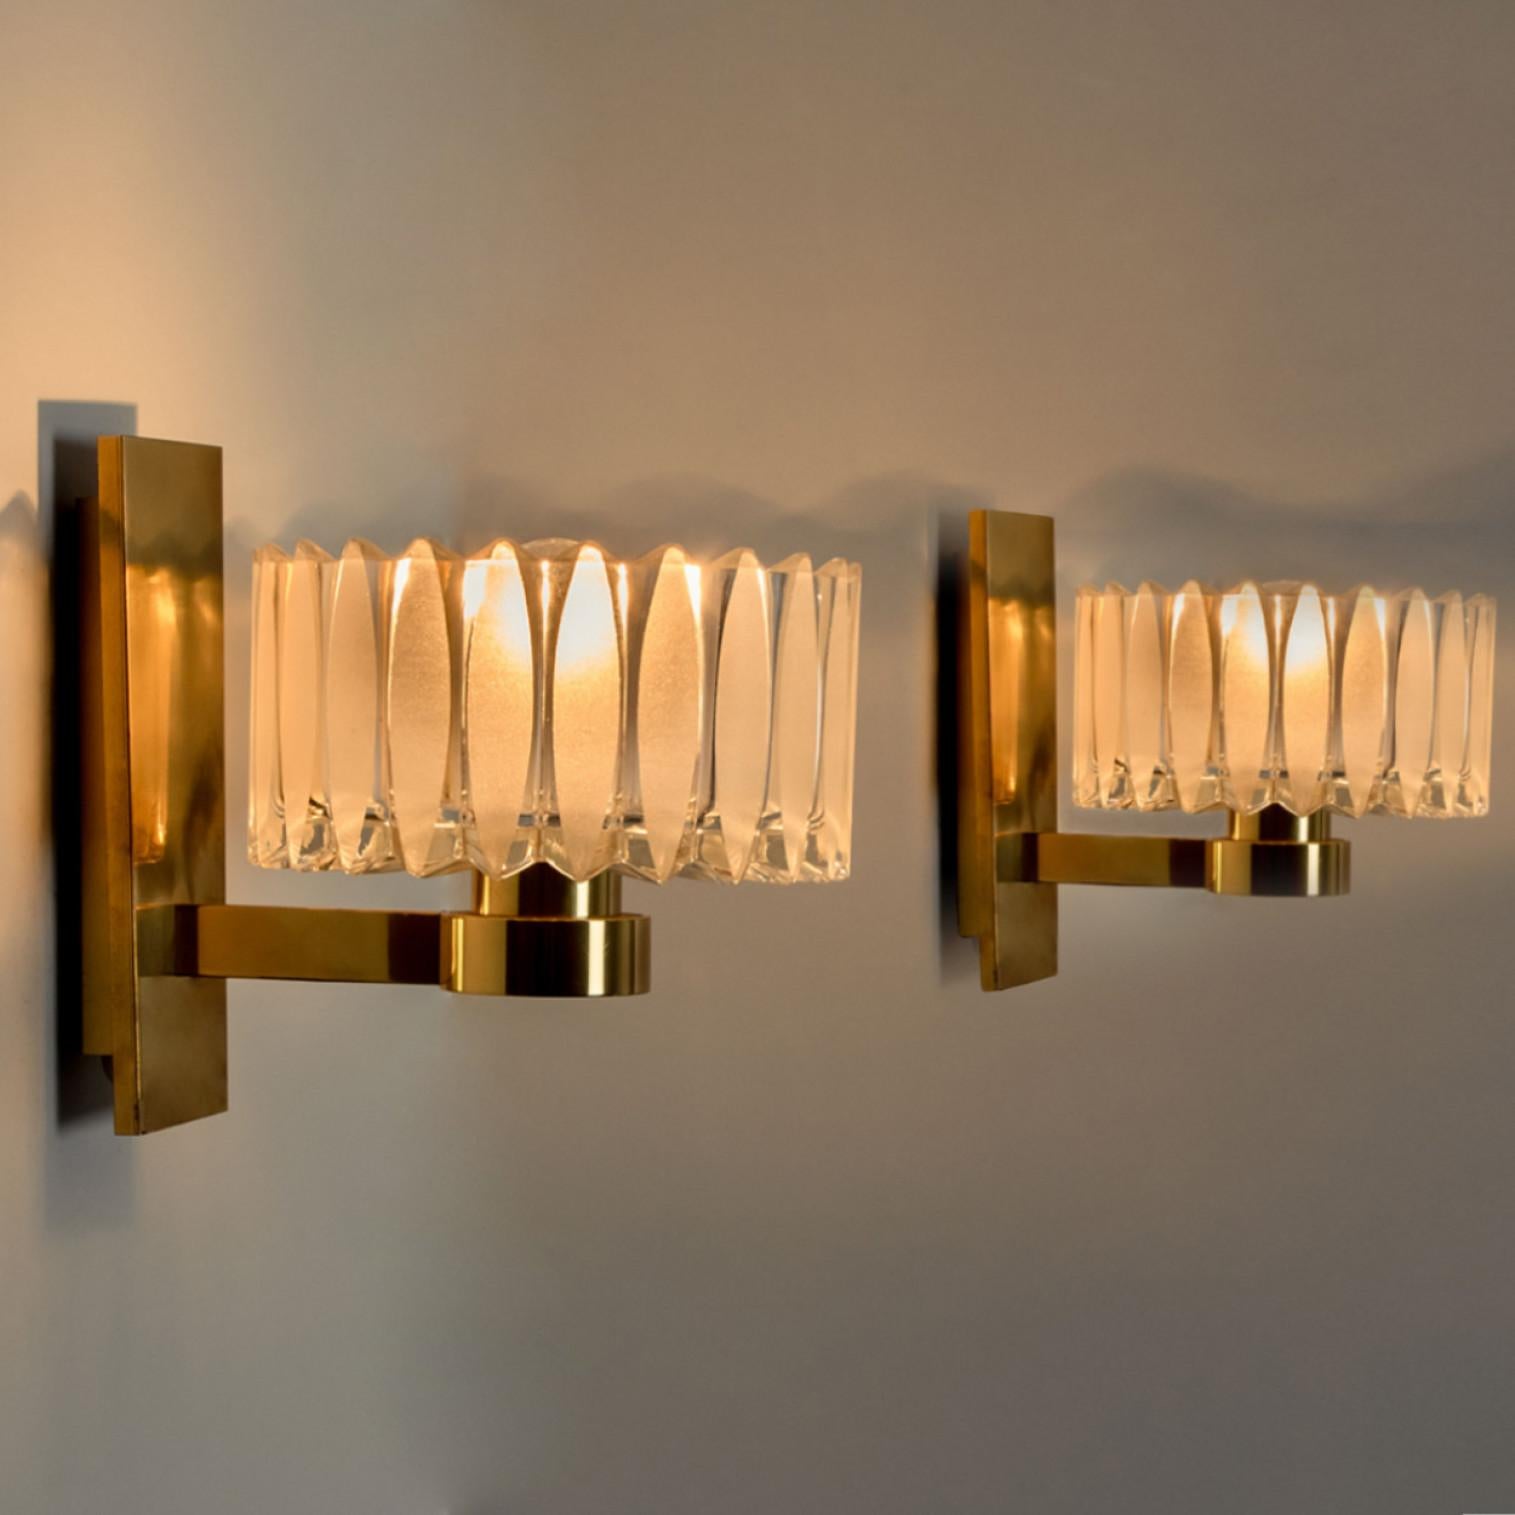 Pair of Hillebrand Brass and Glass Wall Light Fixtures, 1970s For Sale 2